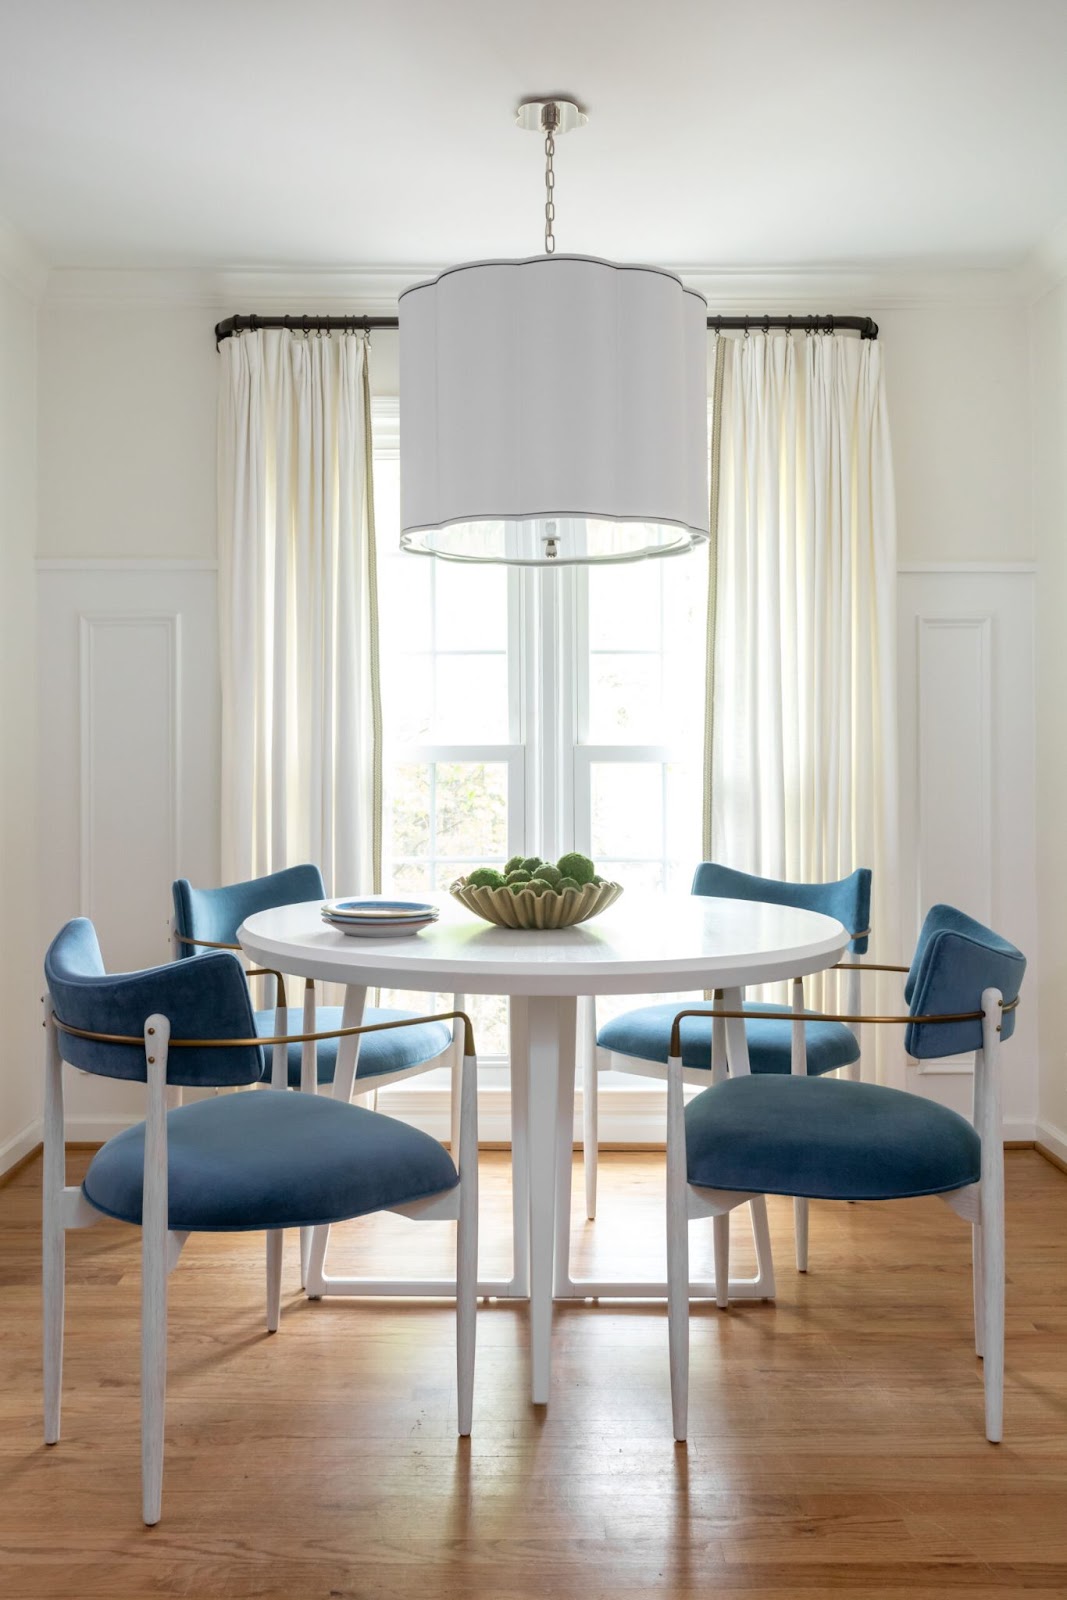 Blue chairs around white dining table. Lamp shade chandelier hangs above. 